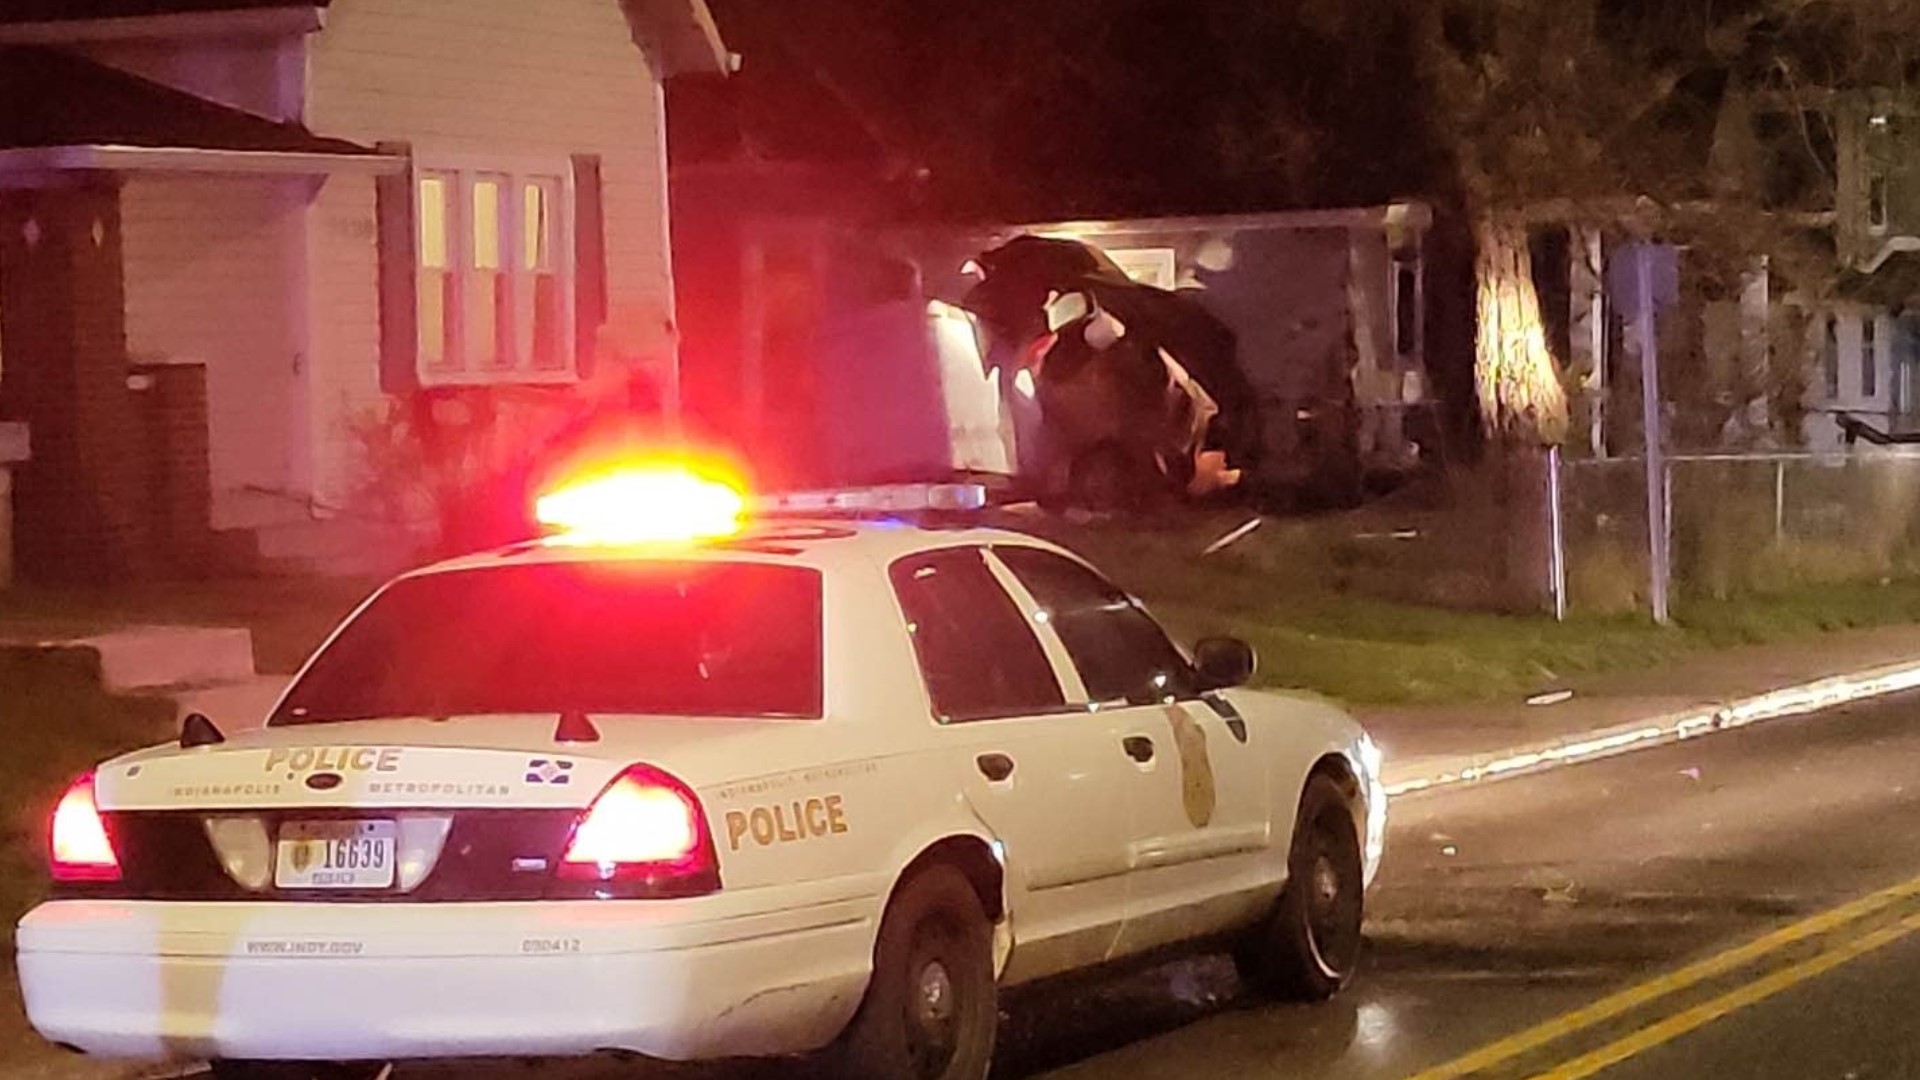 A car clipped a house before crashing into a trailer in the 1100 block of South State Avenue around 4:30 a.m. Thursday, police said.